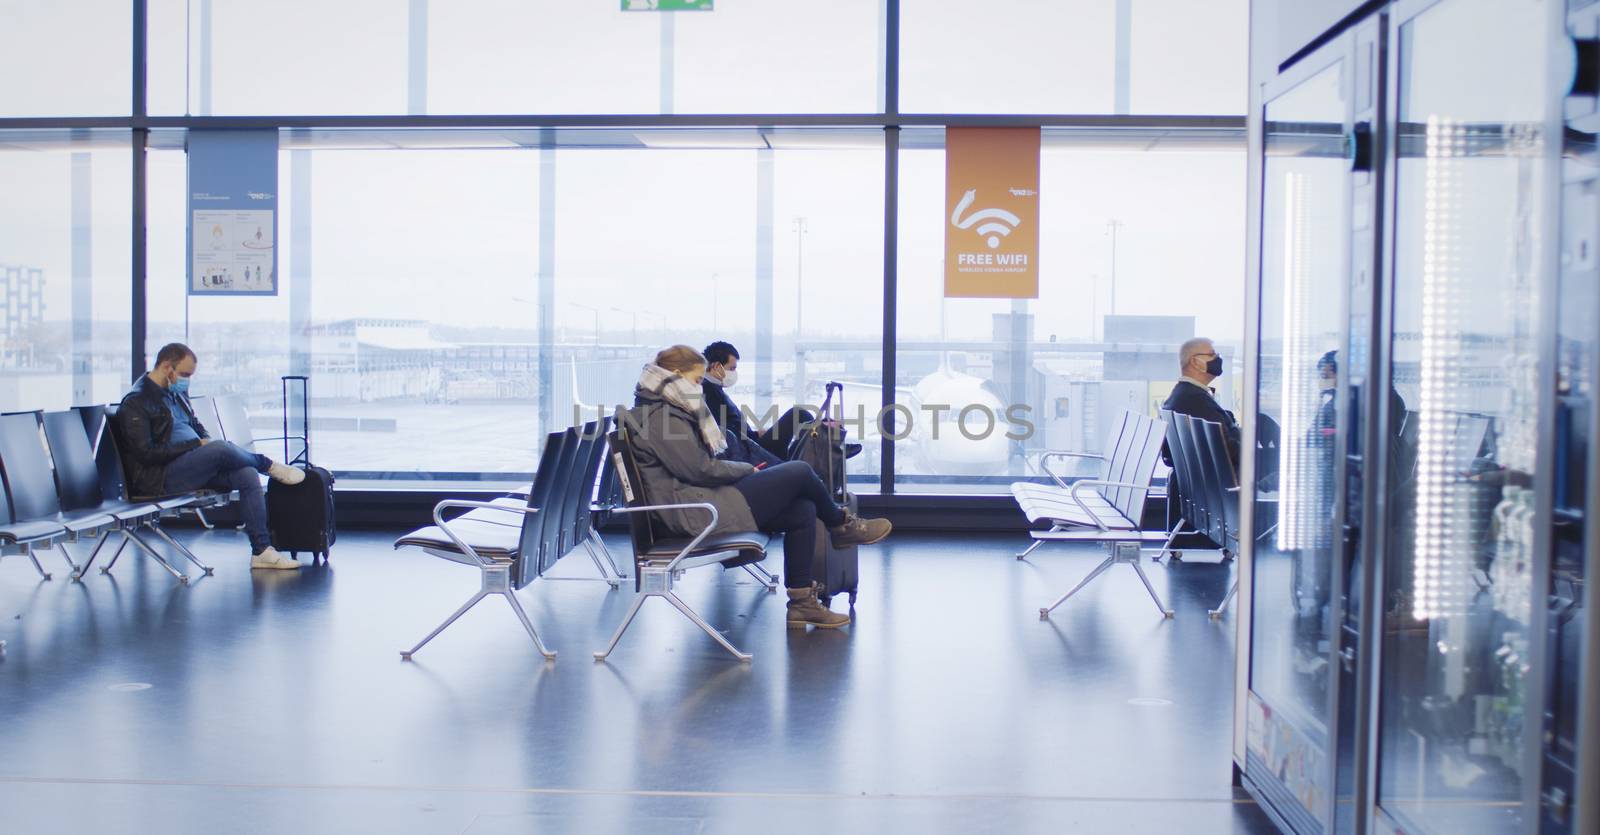 Vienna Airport During Covid Times by haraujo